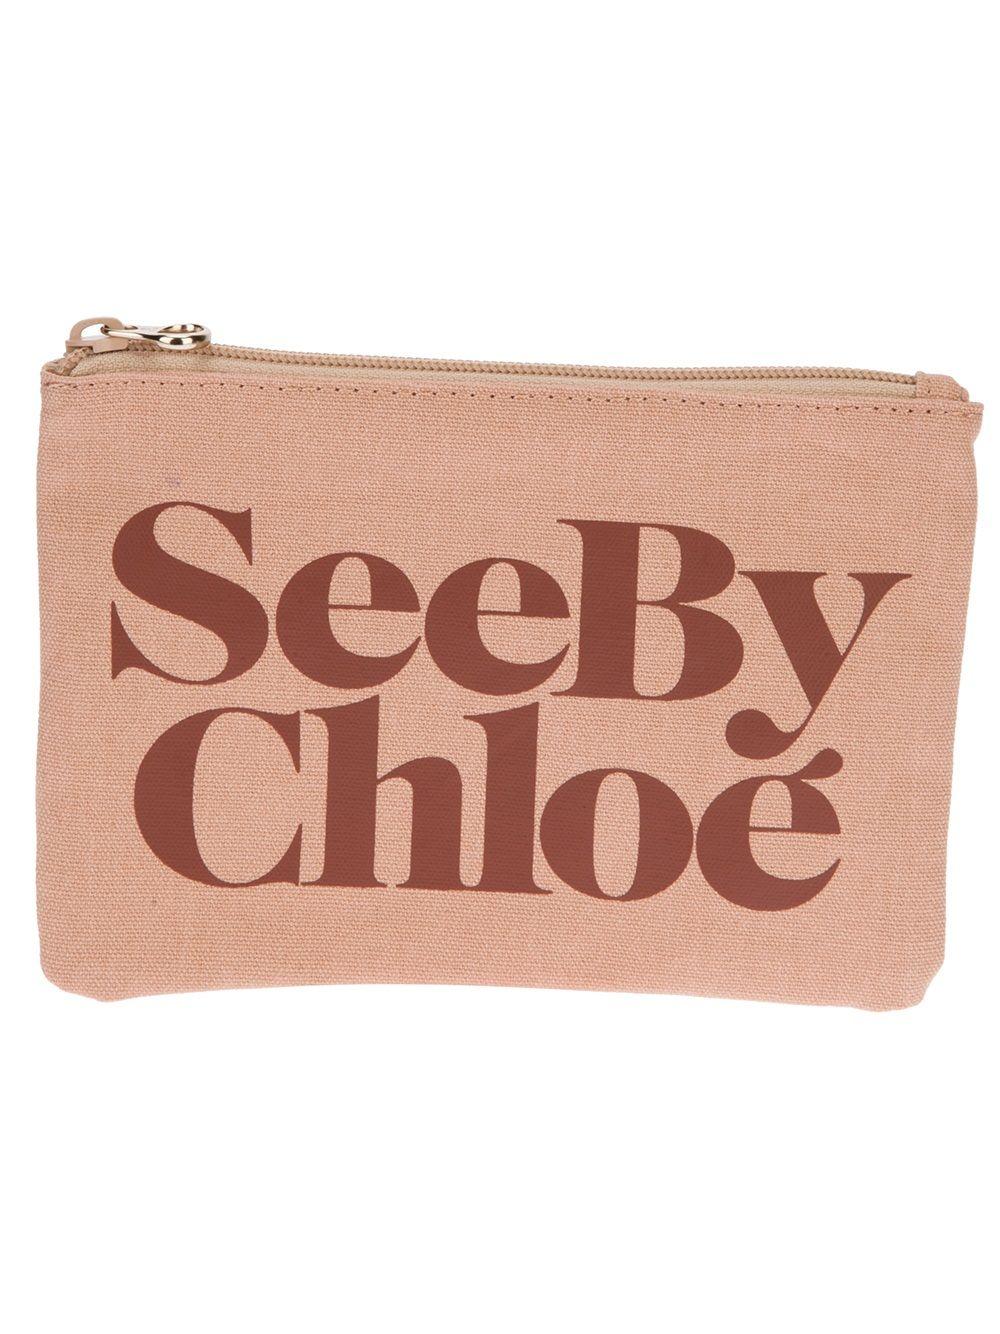 See by Chloe Logo - See By Chloé Logo Print Pouch in Natural - Lyst